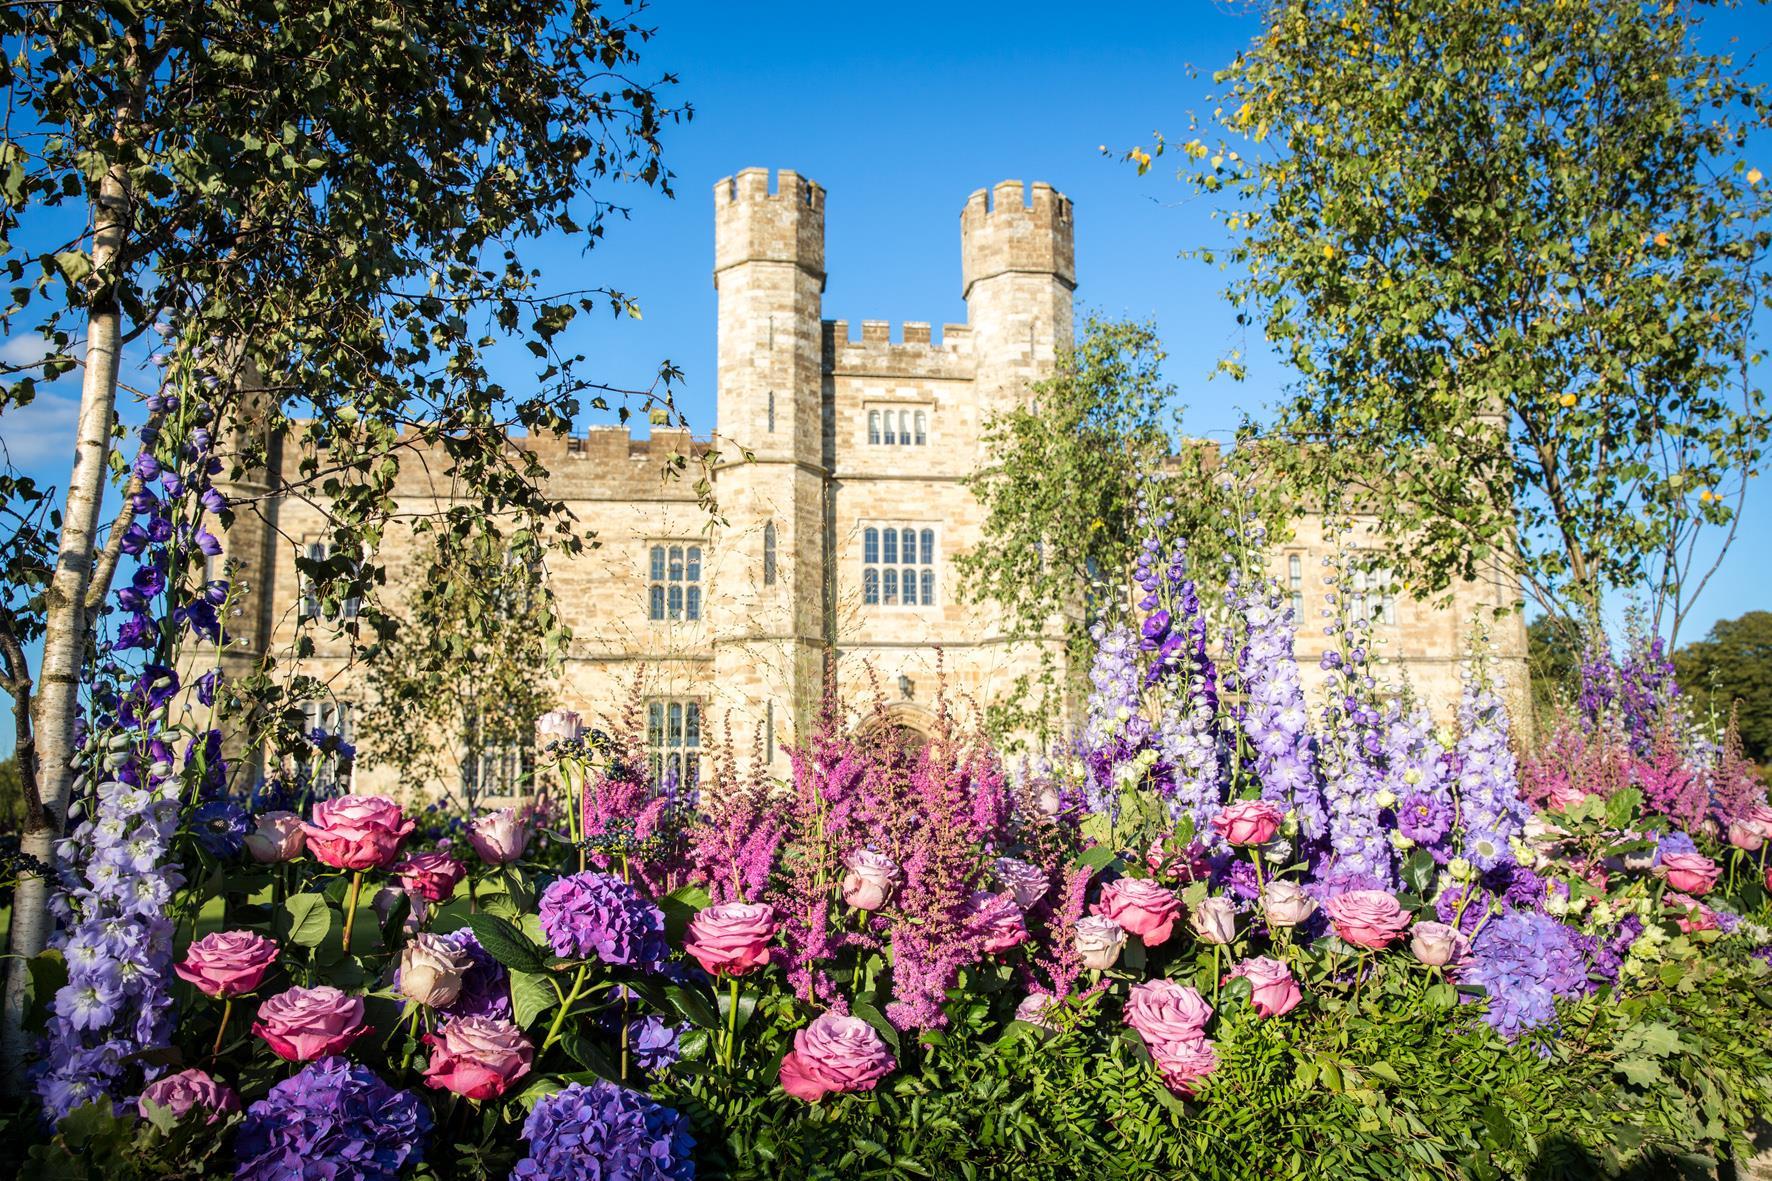 Celebrate 900 years of epic history at Leeds Castle | Sponsored | Group ...